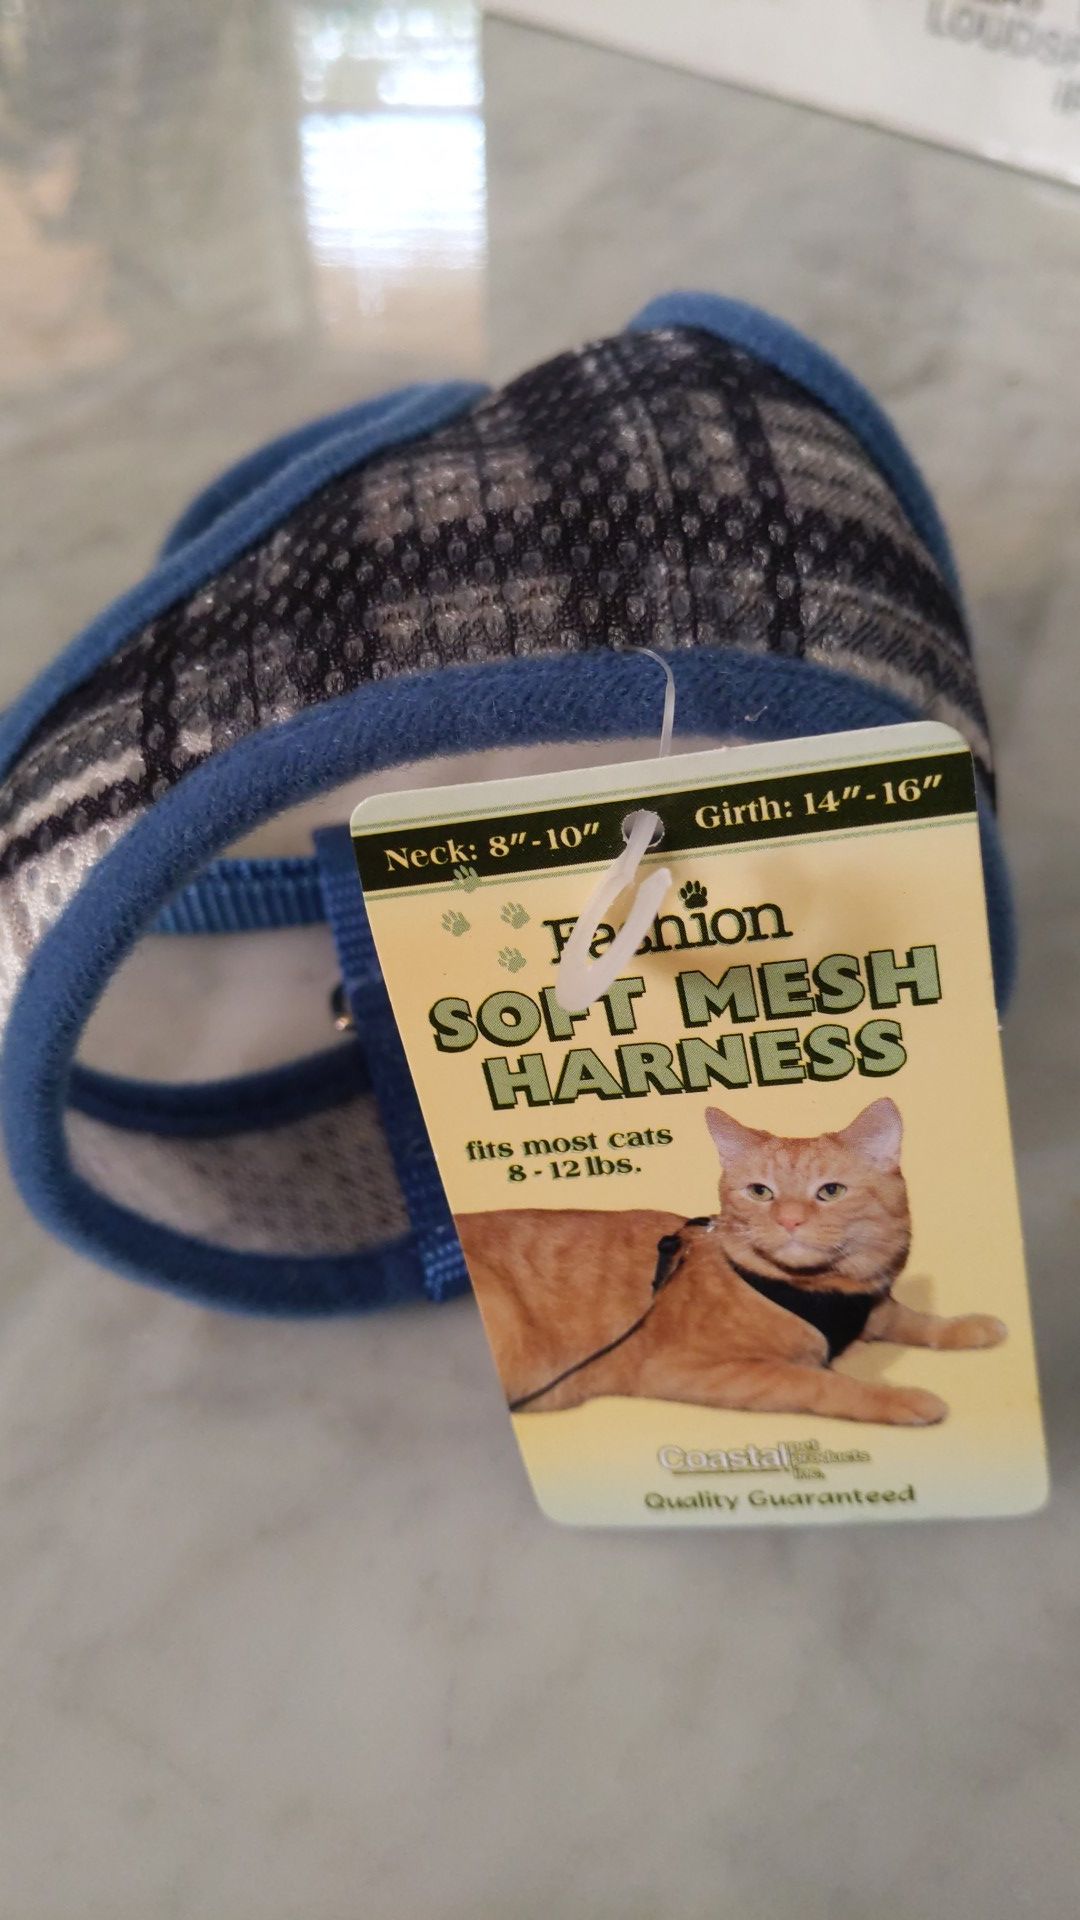 New Soft mesh harness for cats